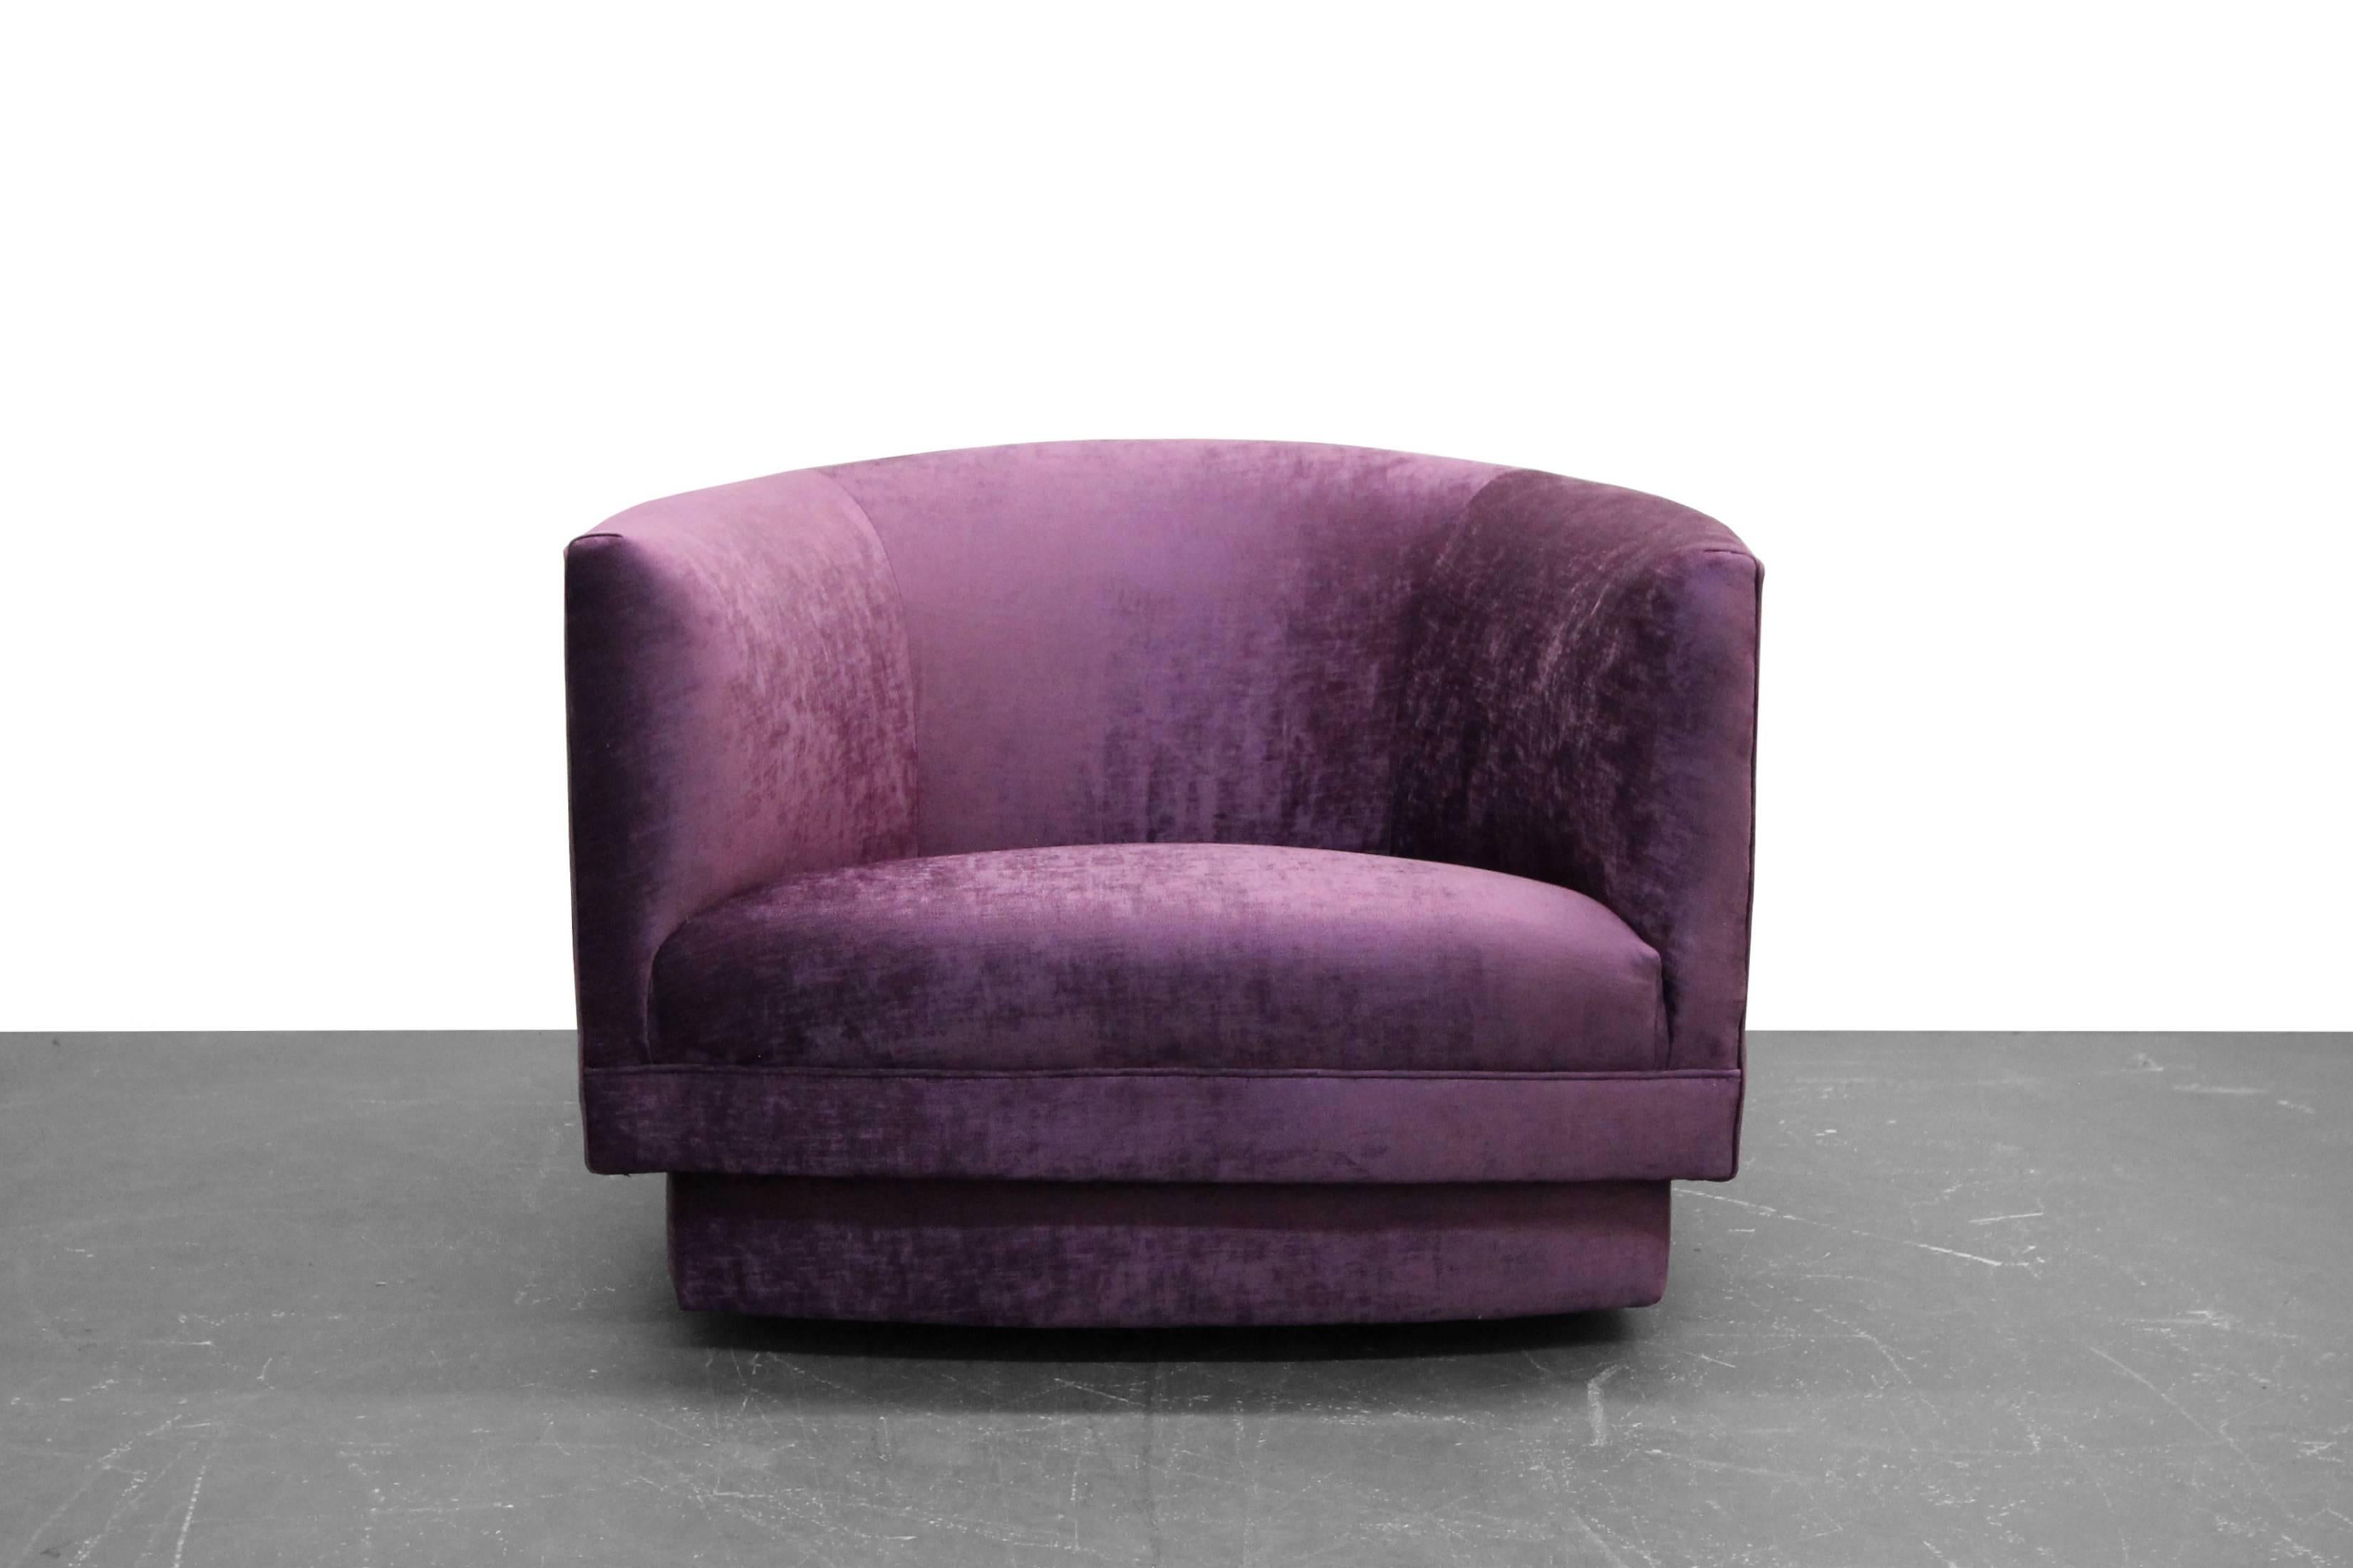 Great one off midcentury swivel chair by Milo Baughman. Great size chair in the perfect shade of purple. Love how the base is shaped to the chair.

Completely restored with all new foam and dark purple fuscia velvet.